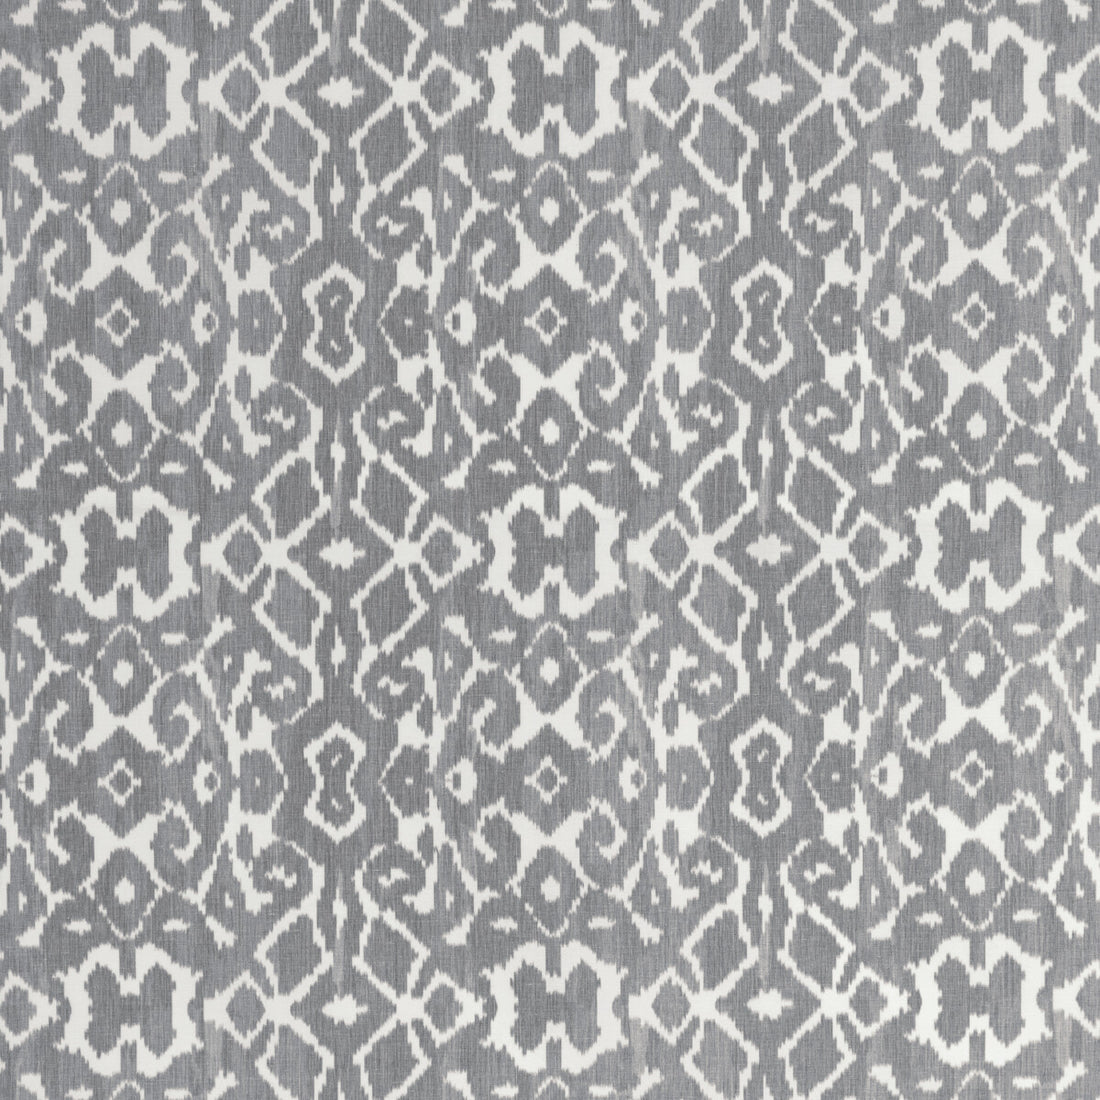 Toponas Print fabric in smoke color - pattern 2020206.21.0 - by Lee Jofa in the Breckenridge collection